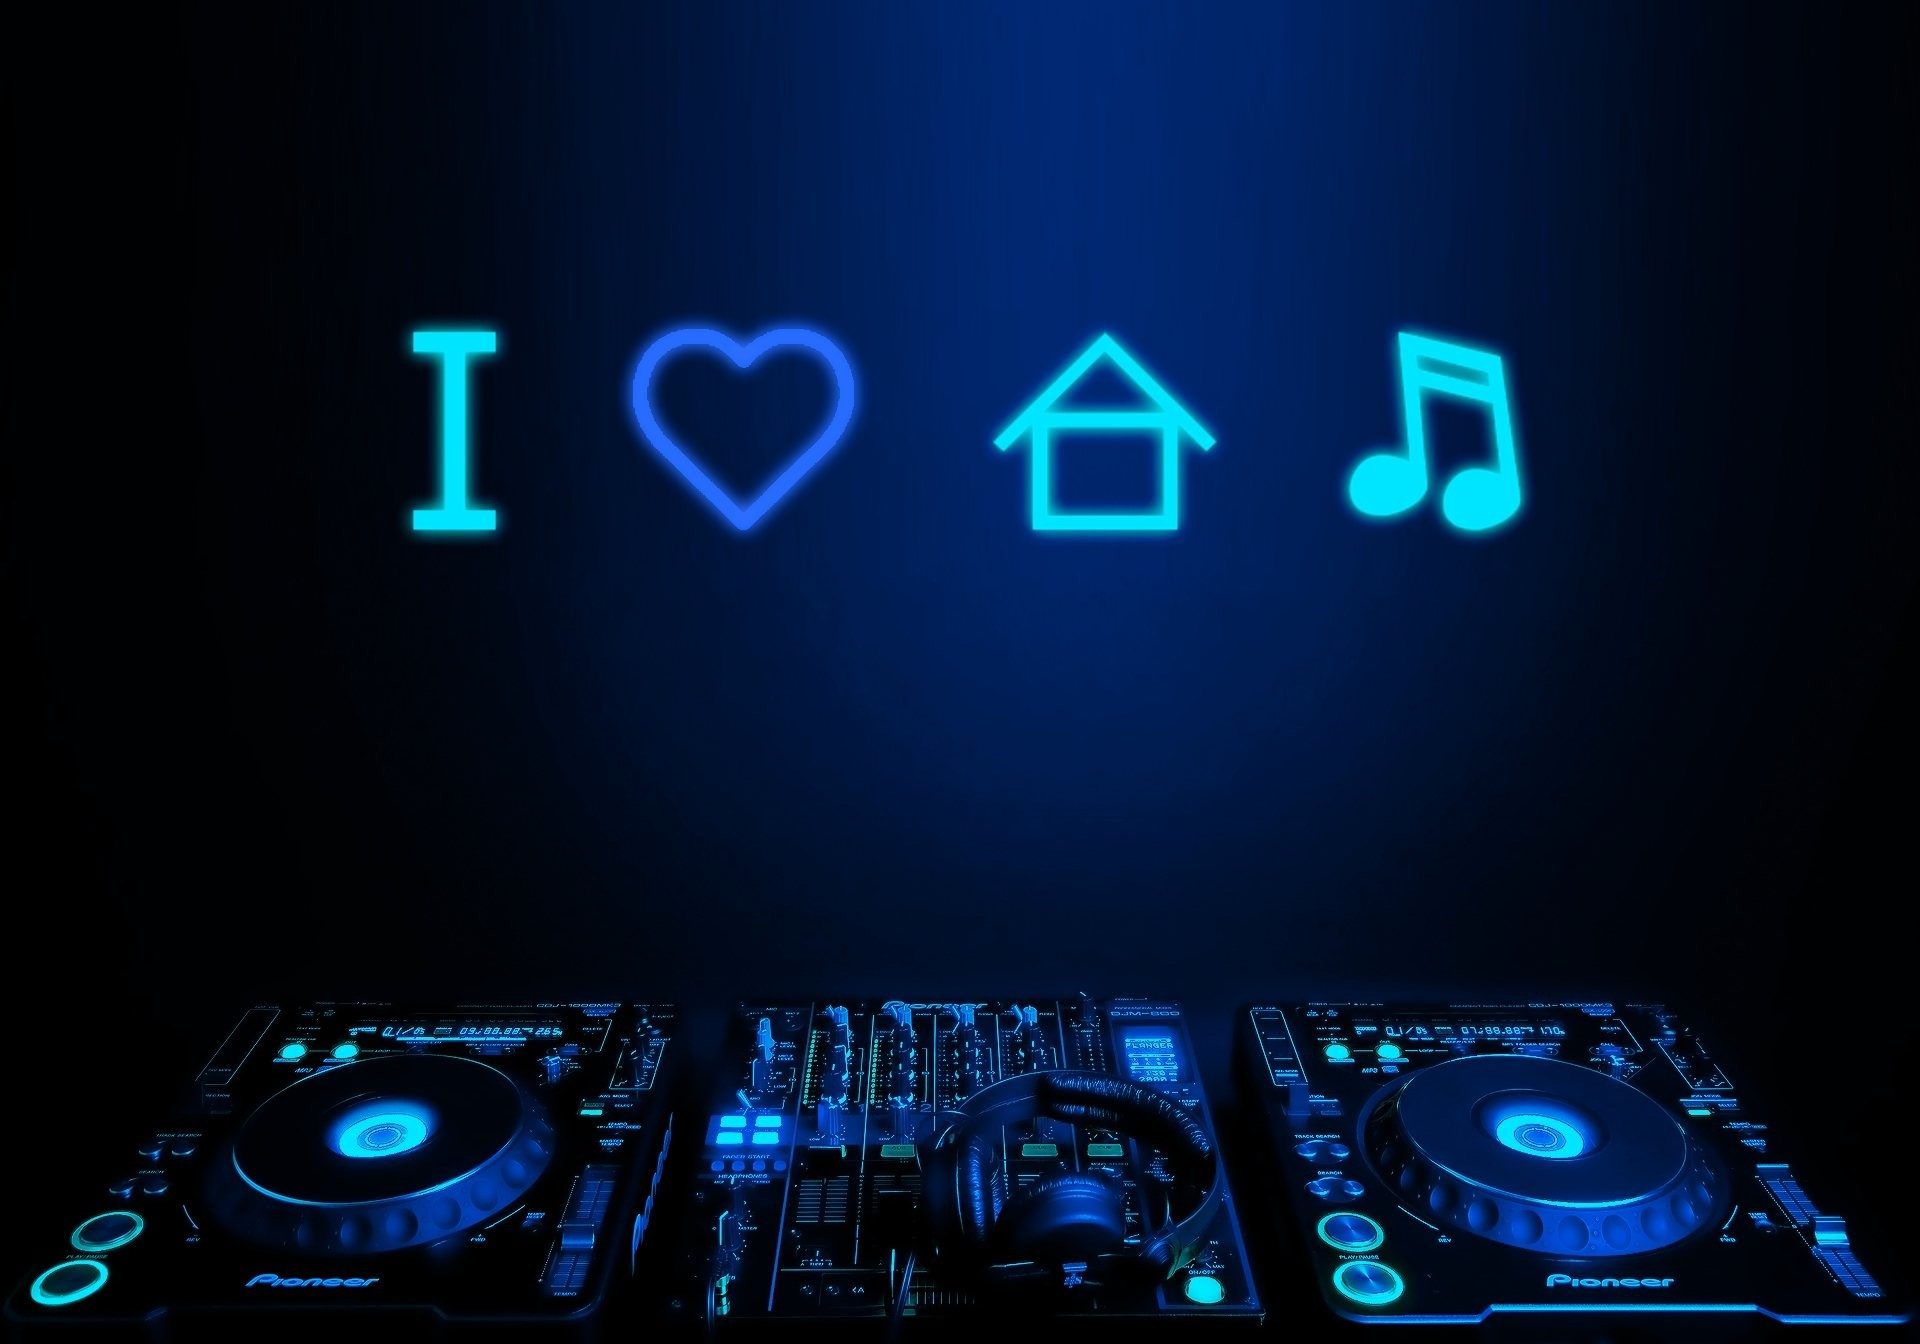 1920x1344 ... Dj Wallpaper - Android Apps on Google Play ...